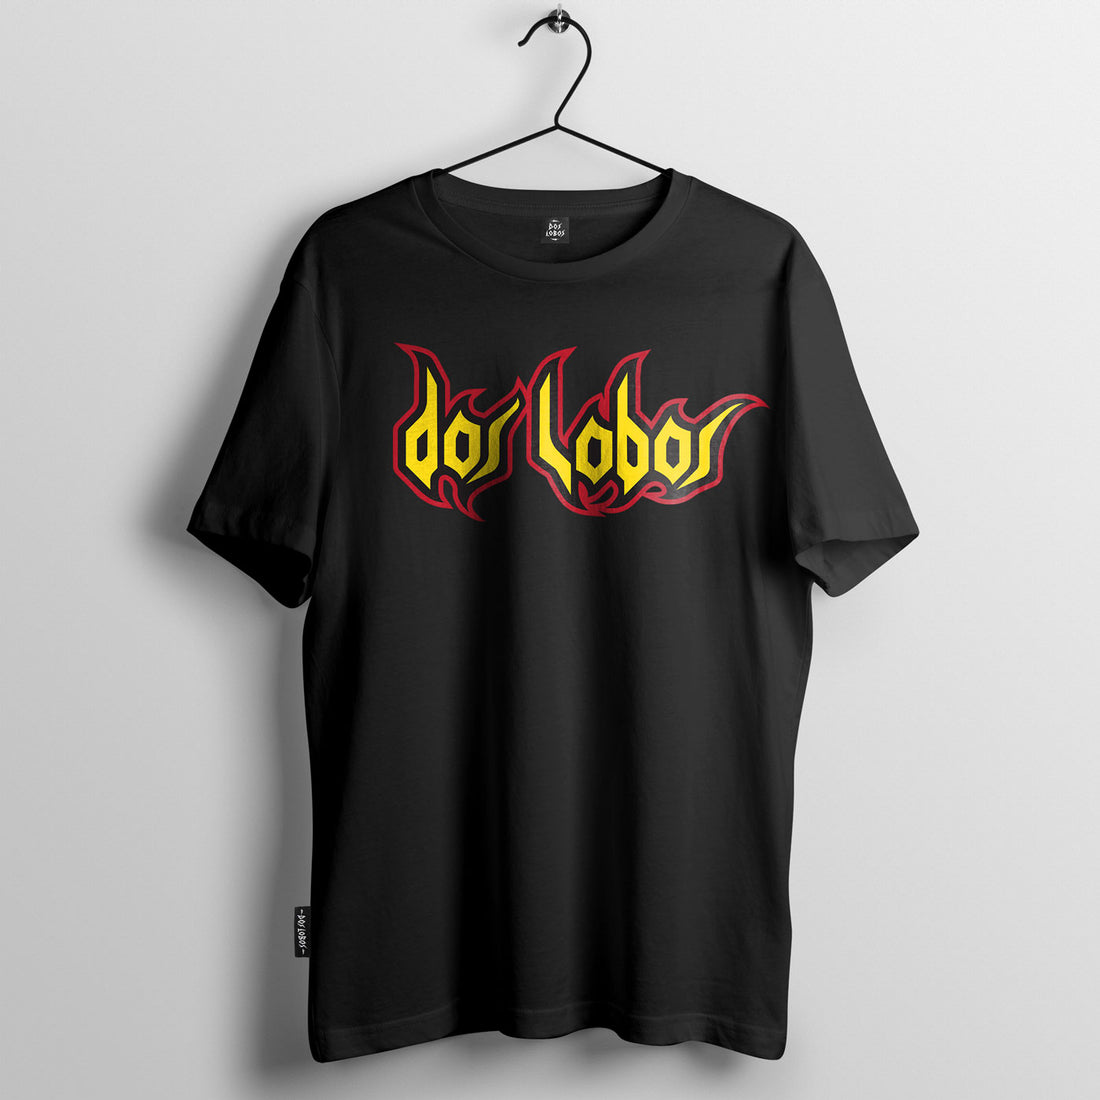 100% Black Cotton Tee by Dos Lobos - Inner Flame